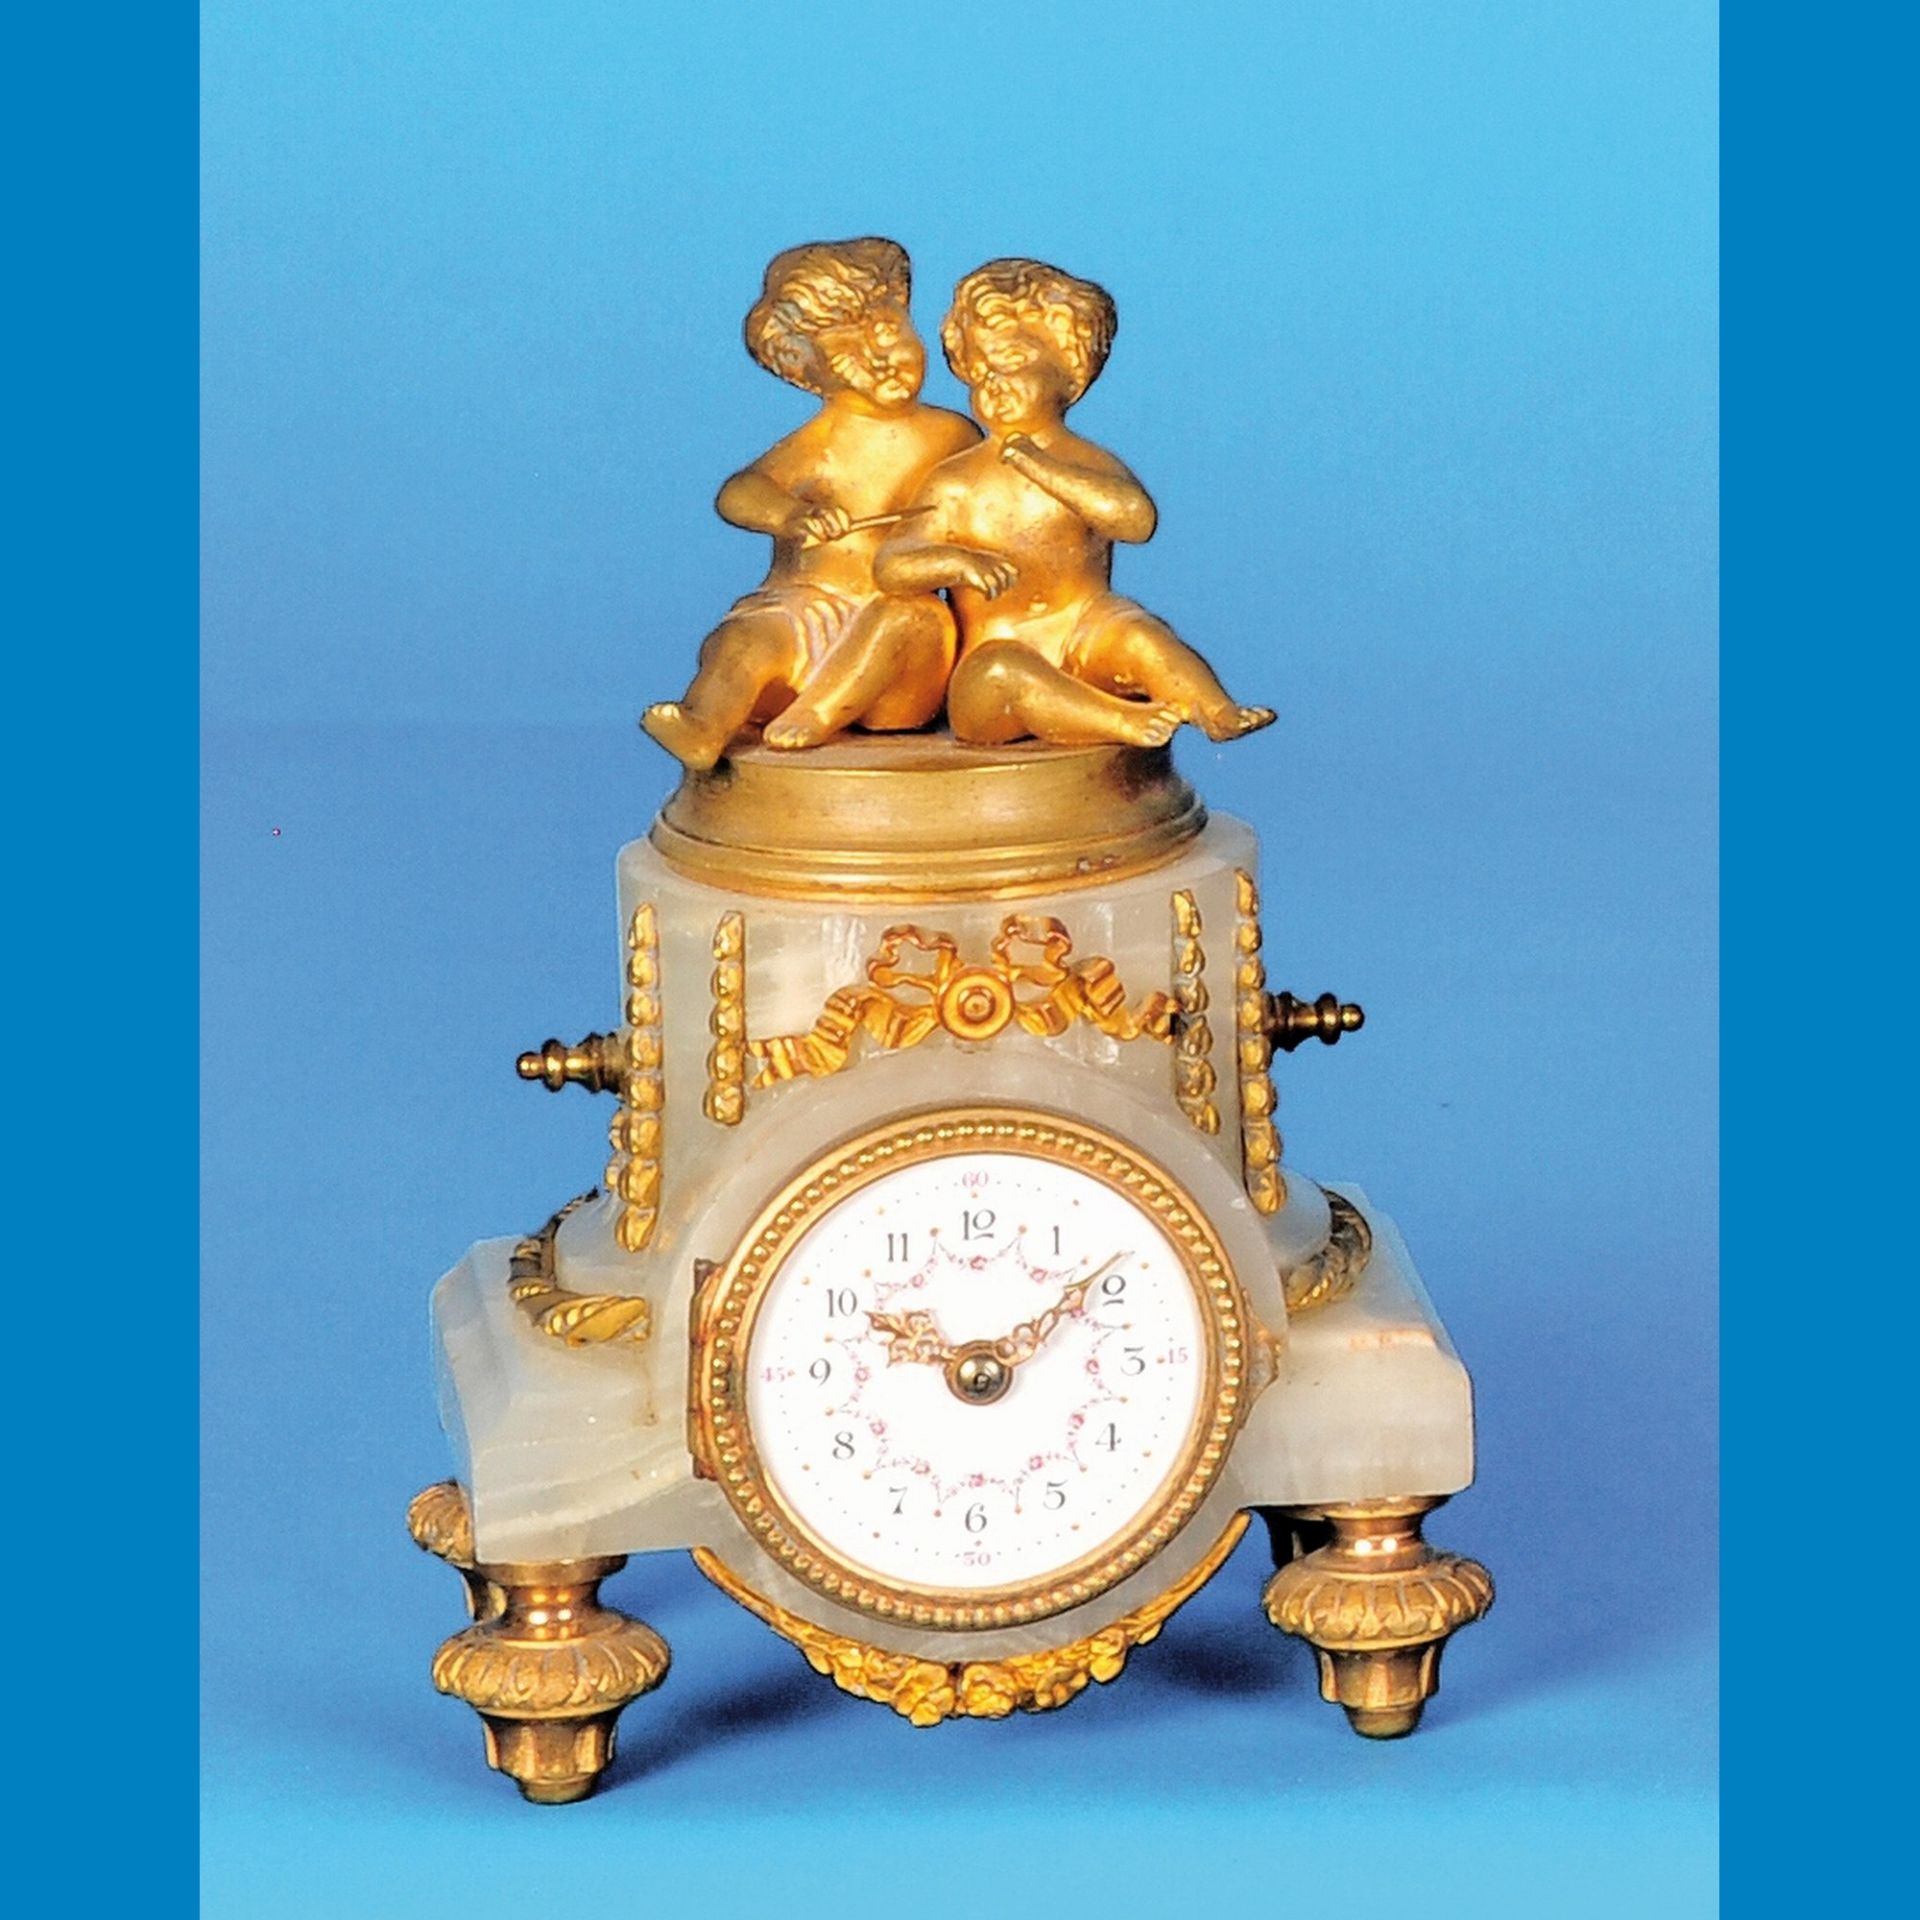 Small alabaster table clock with 8-day movement